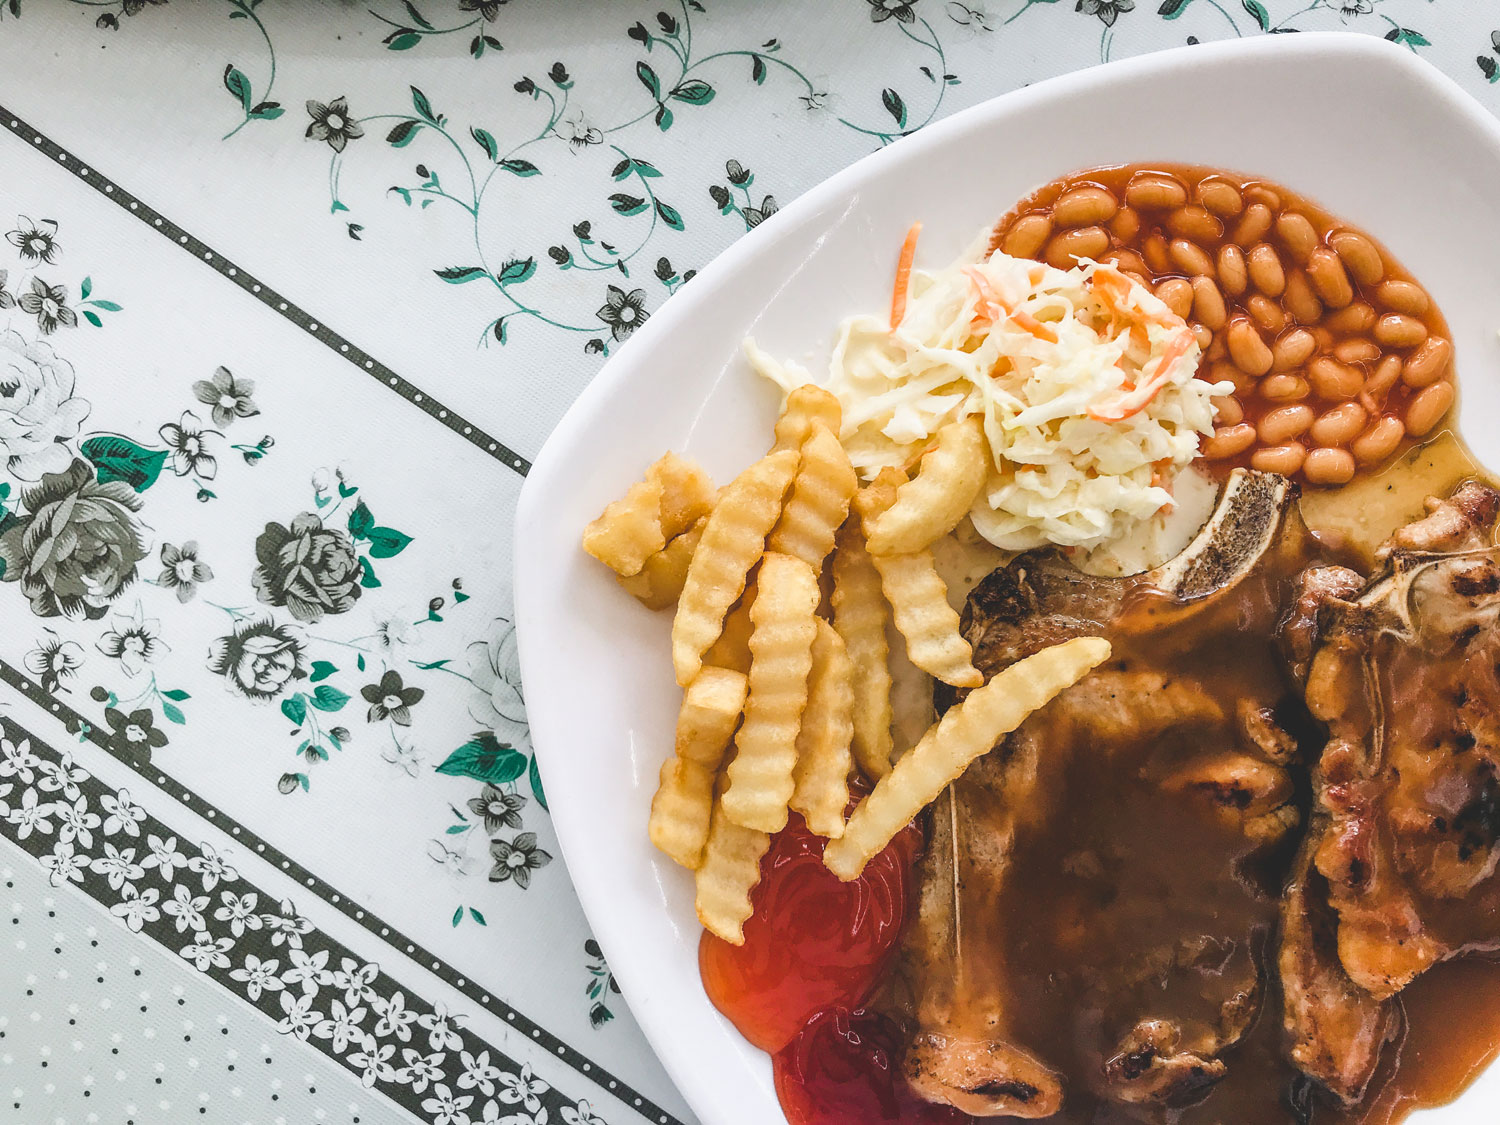 A plated porkchop in brown sauce served with crinkle-cut fries, baked beans and coleslaw.